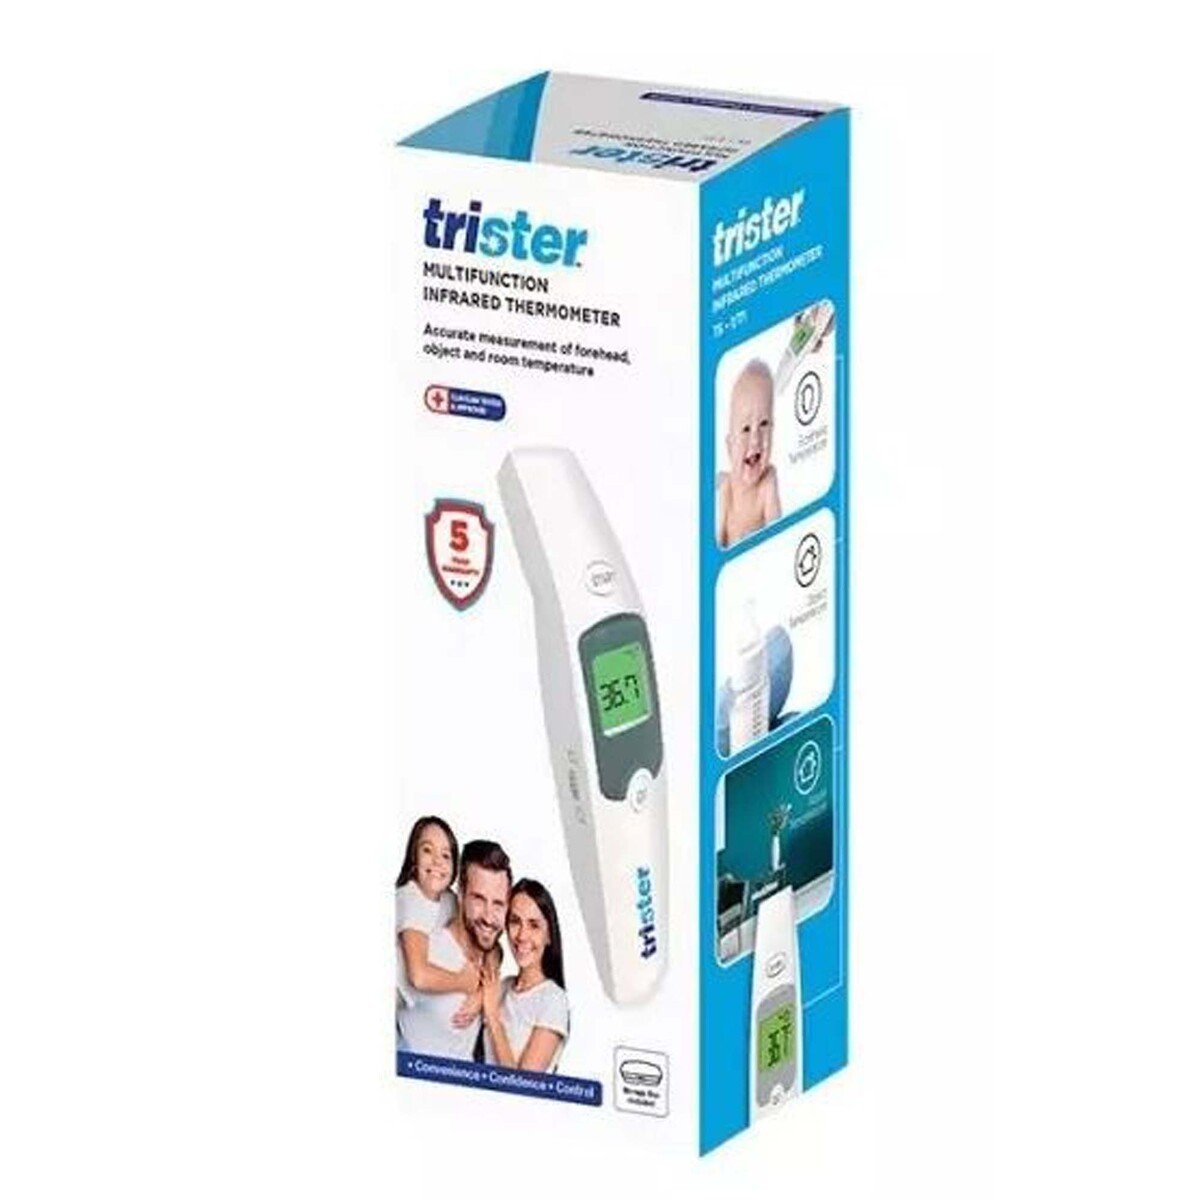 Trister Multi Function Infrared Thermometer TS-1/T1